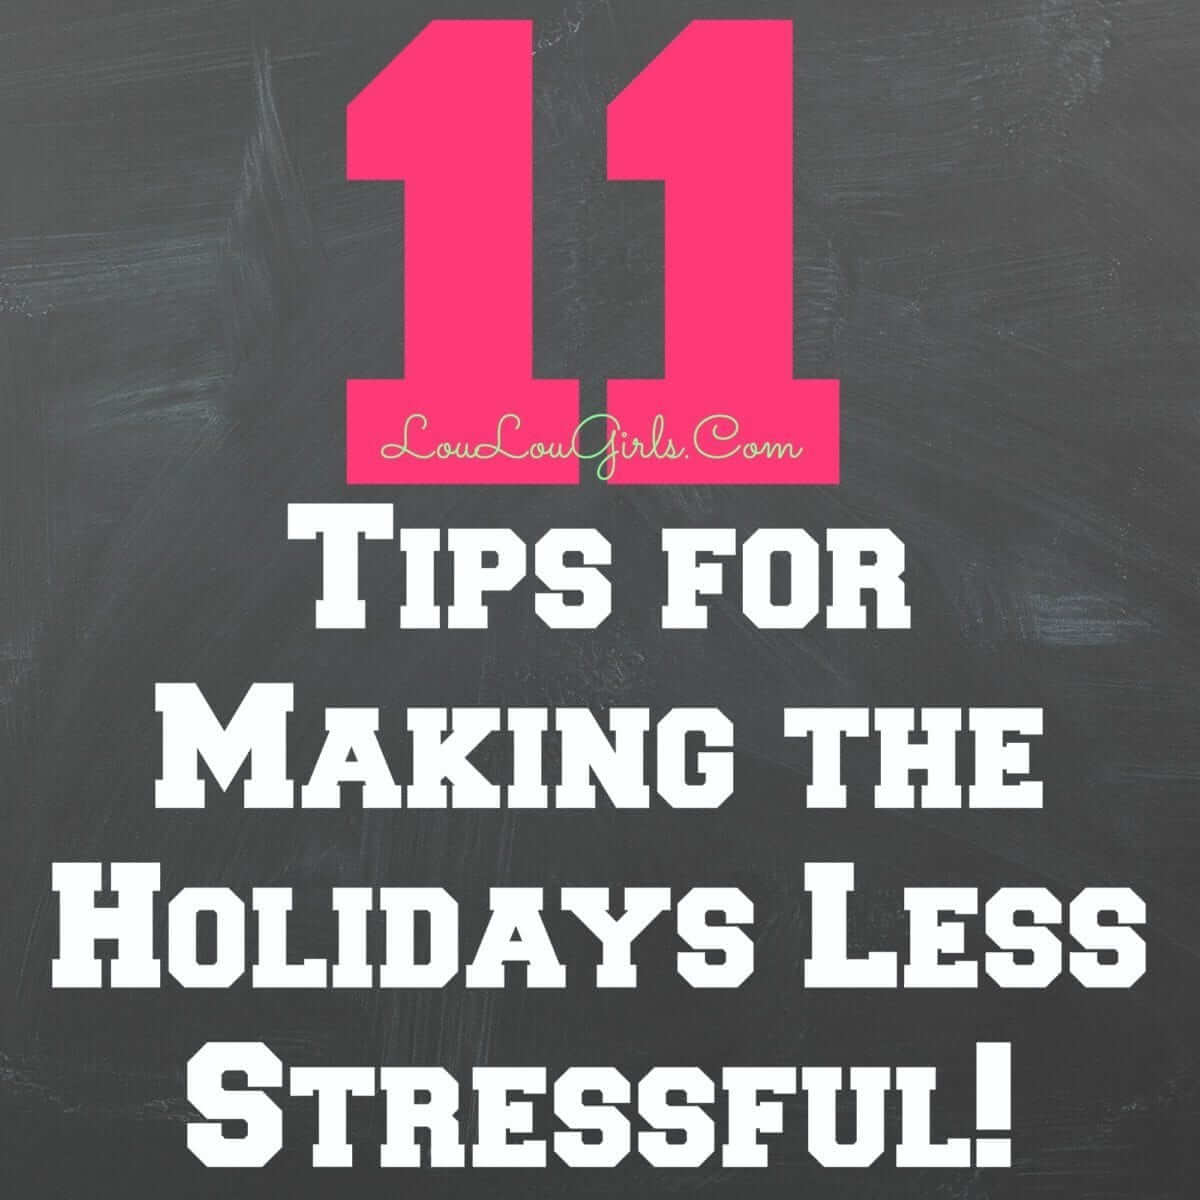 Tips for Making the Holidays Less Stressful